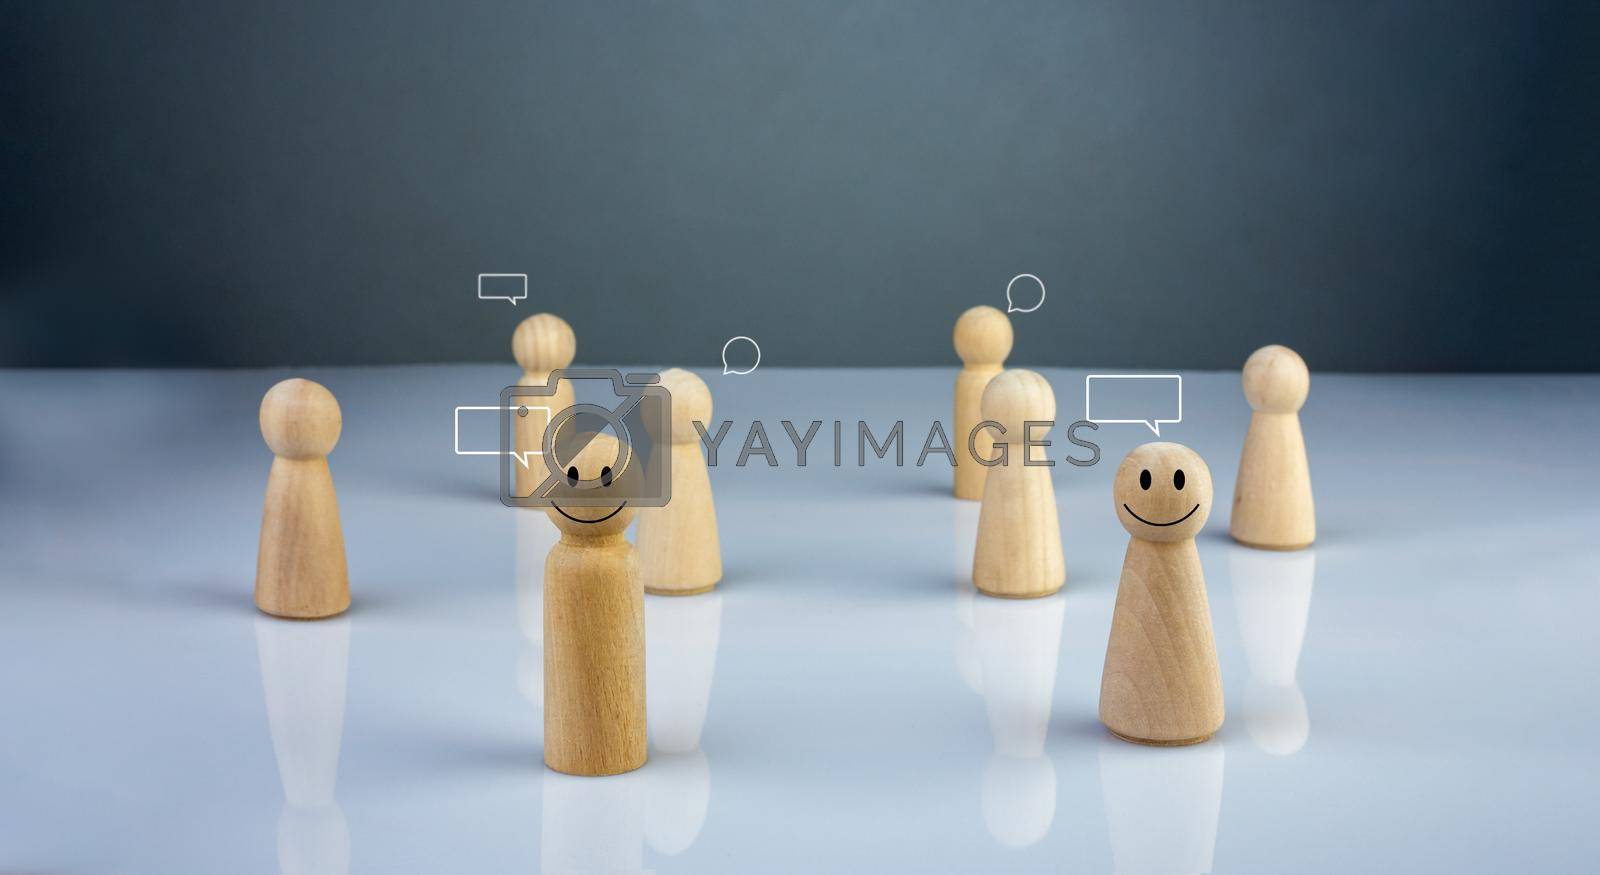 Royalty free image of Wooden doll figure with communication and technology symbols. Social media and technology concept. by Unimages2527